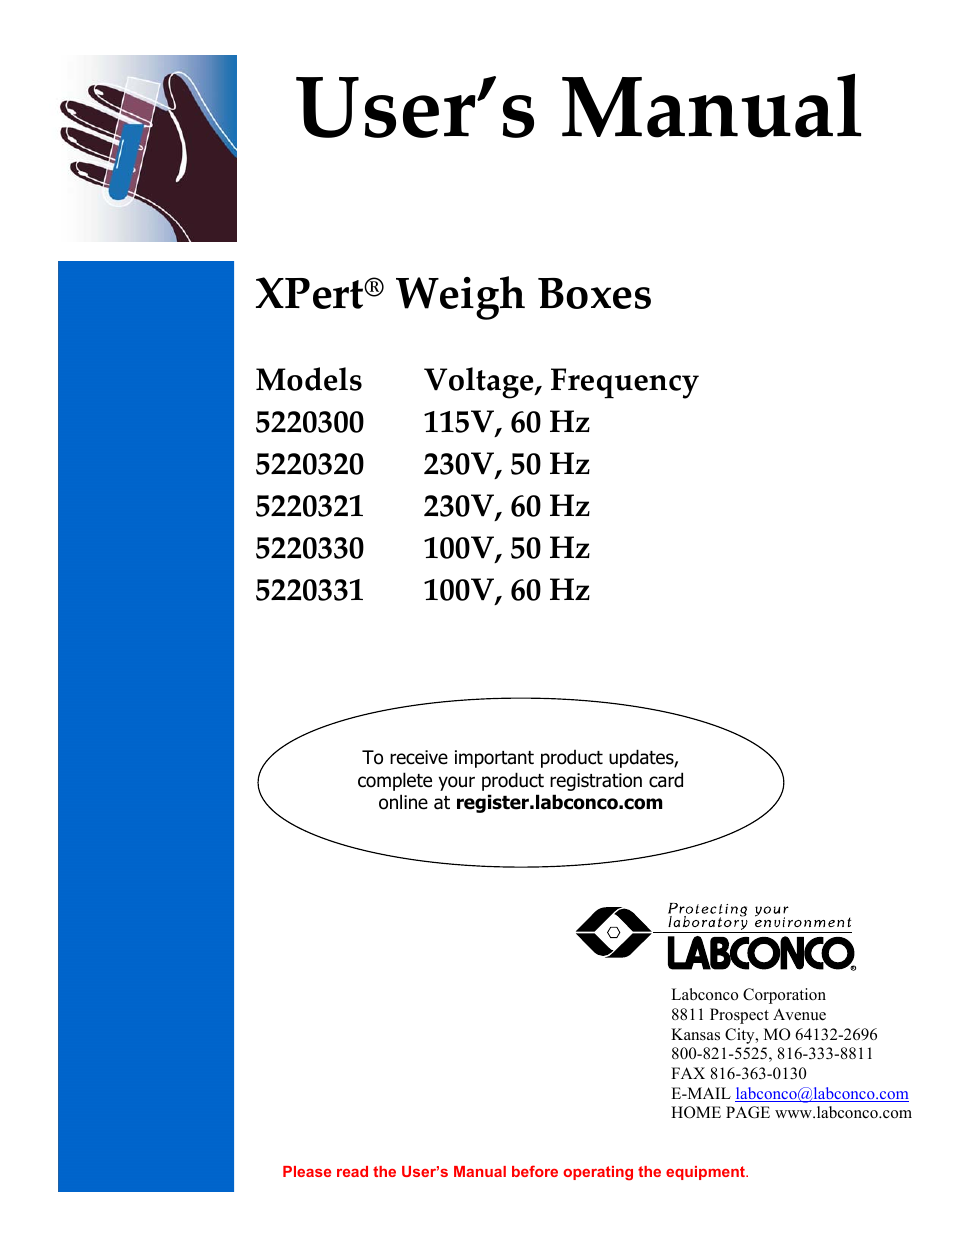 XPert Weigh Boxes 5220320